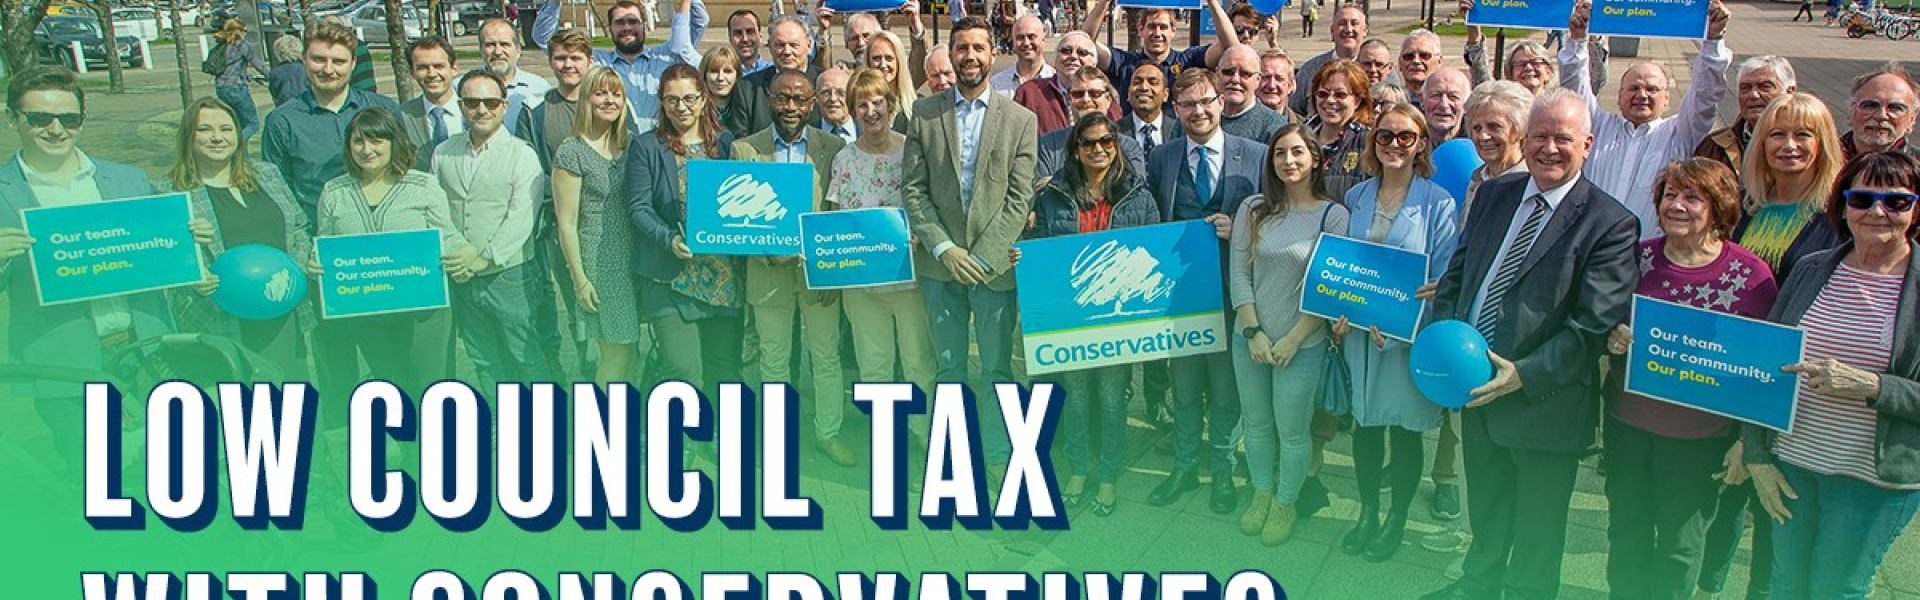 Council Tax lower in Conservative councils